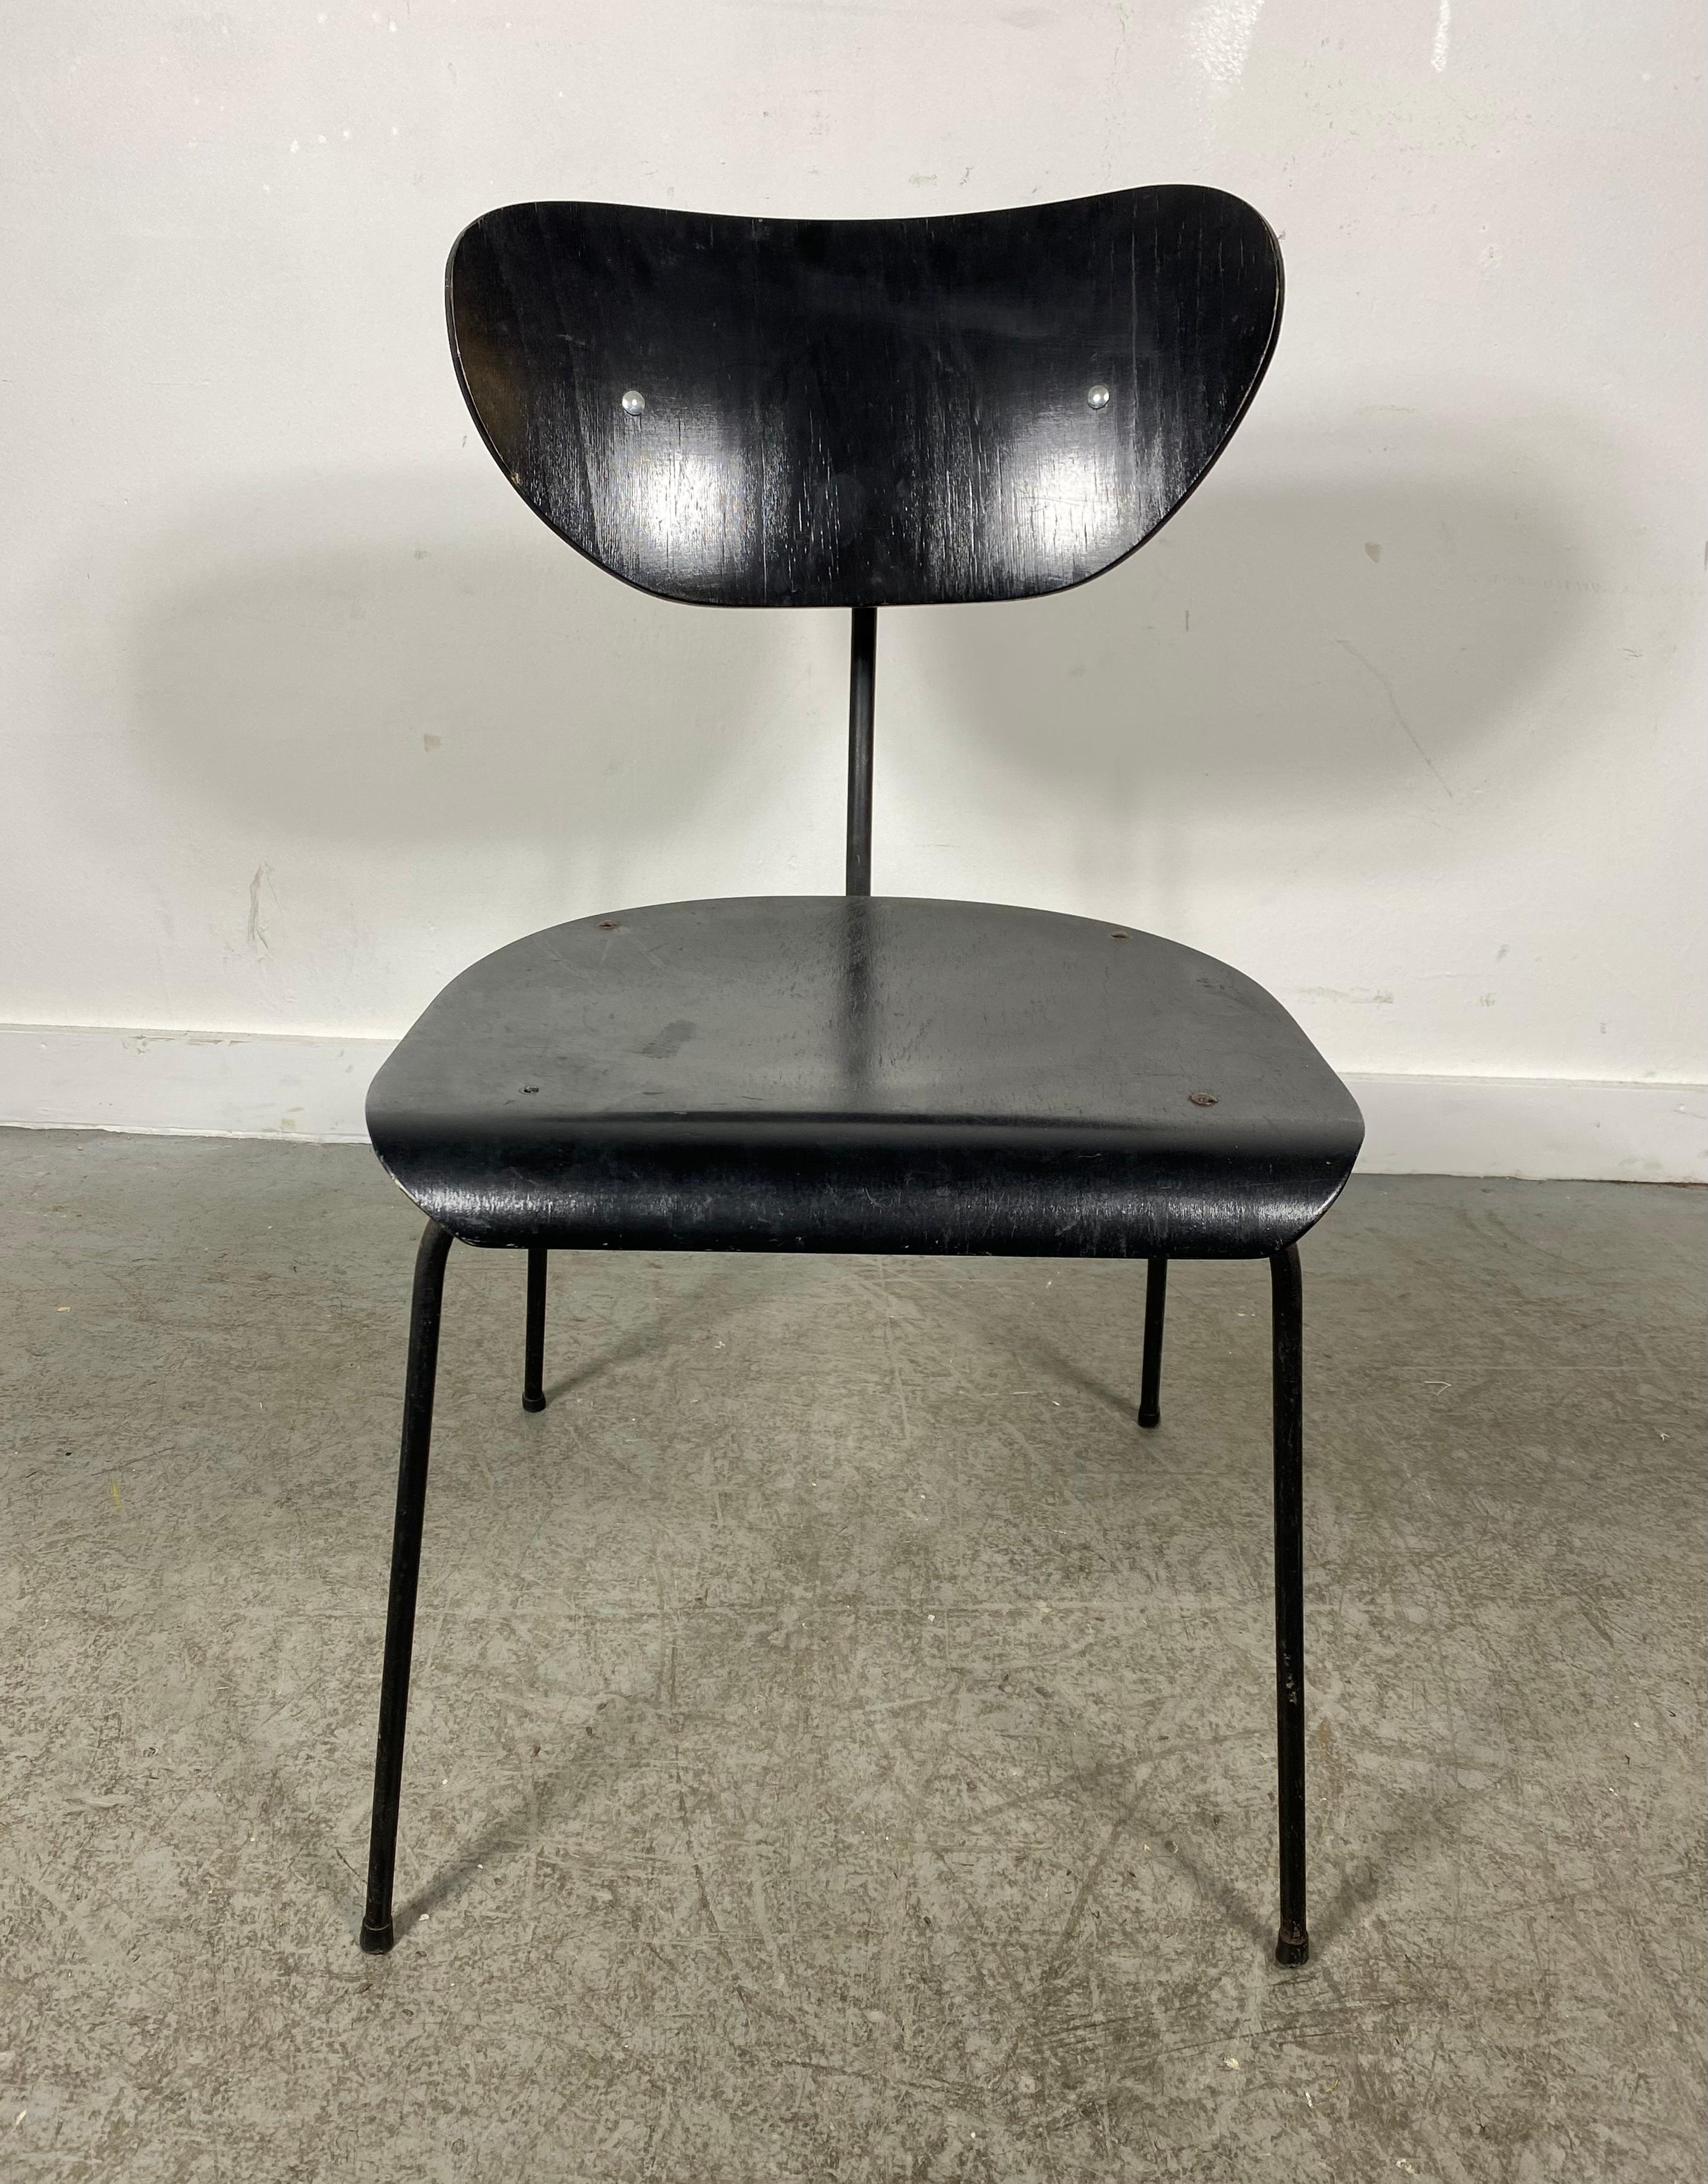 Modernist Iron and Plywood side chair attributed to Egon Eiermann, Germany.. Dramatic lines,,exaggerated curved iron back support as well as unusual back seat rest,,Extremely comfortable..Perfect modern accent chair,
Egon Eiermann was one of